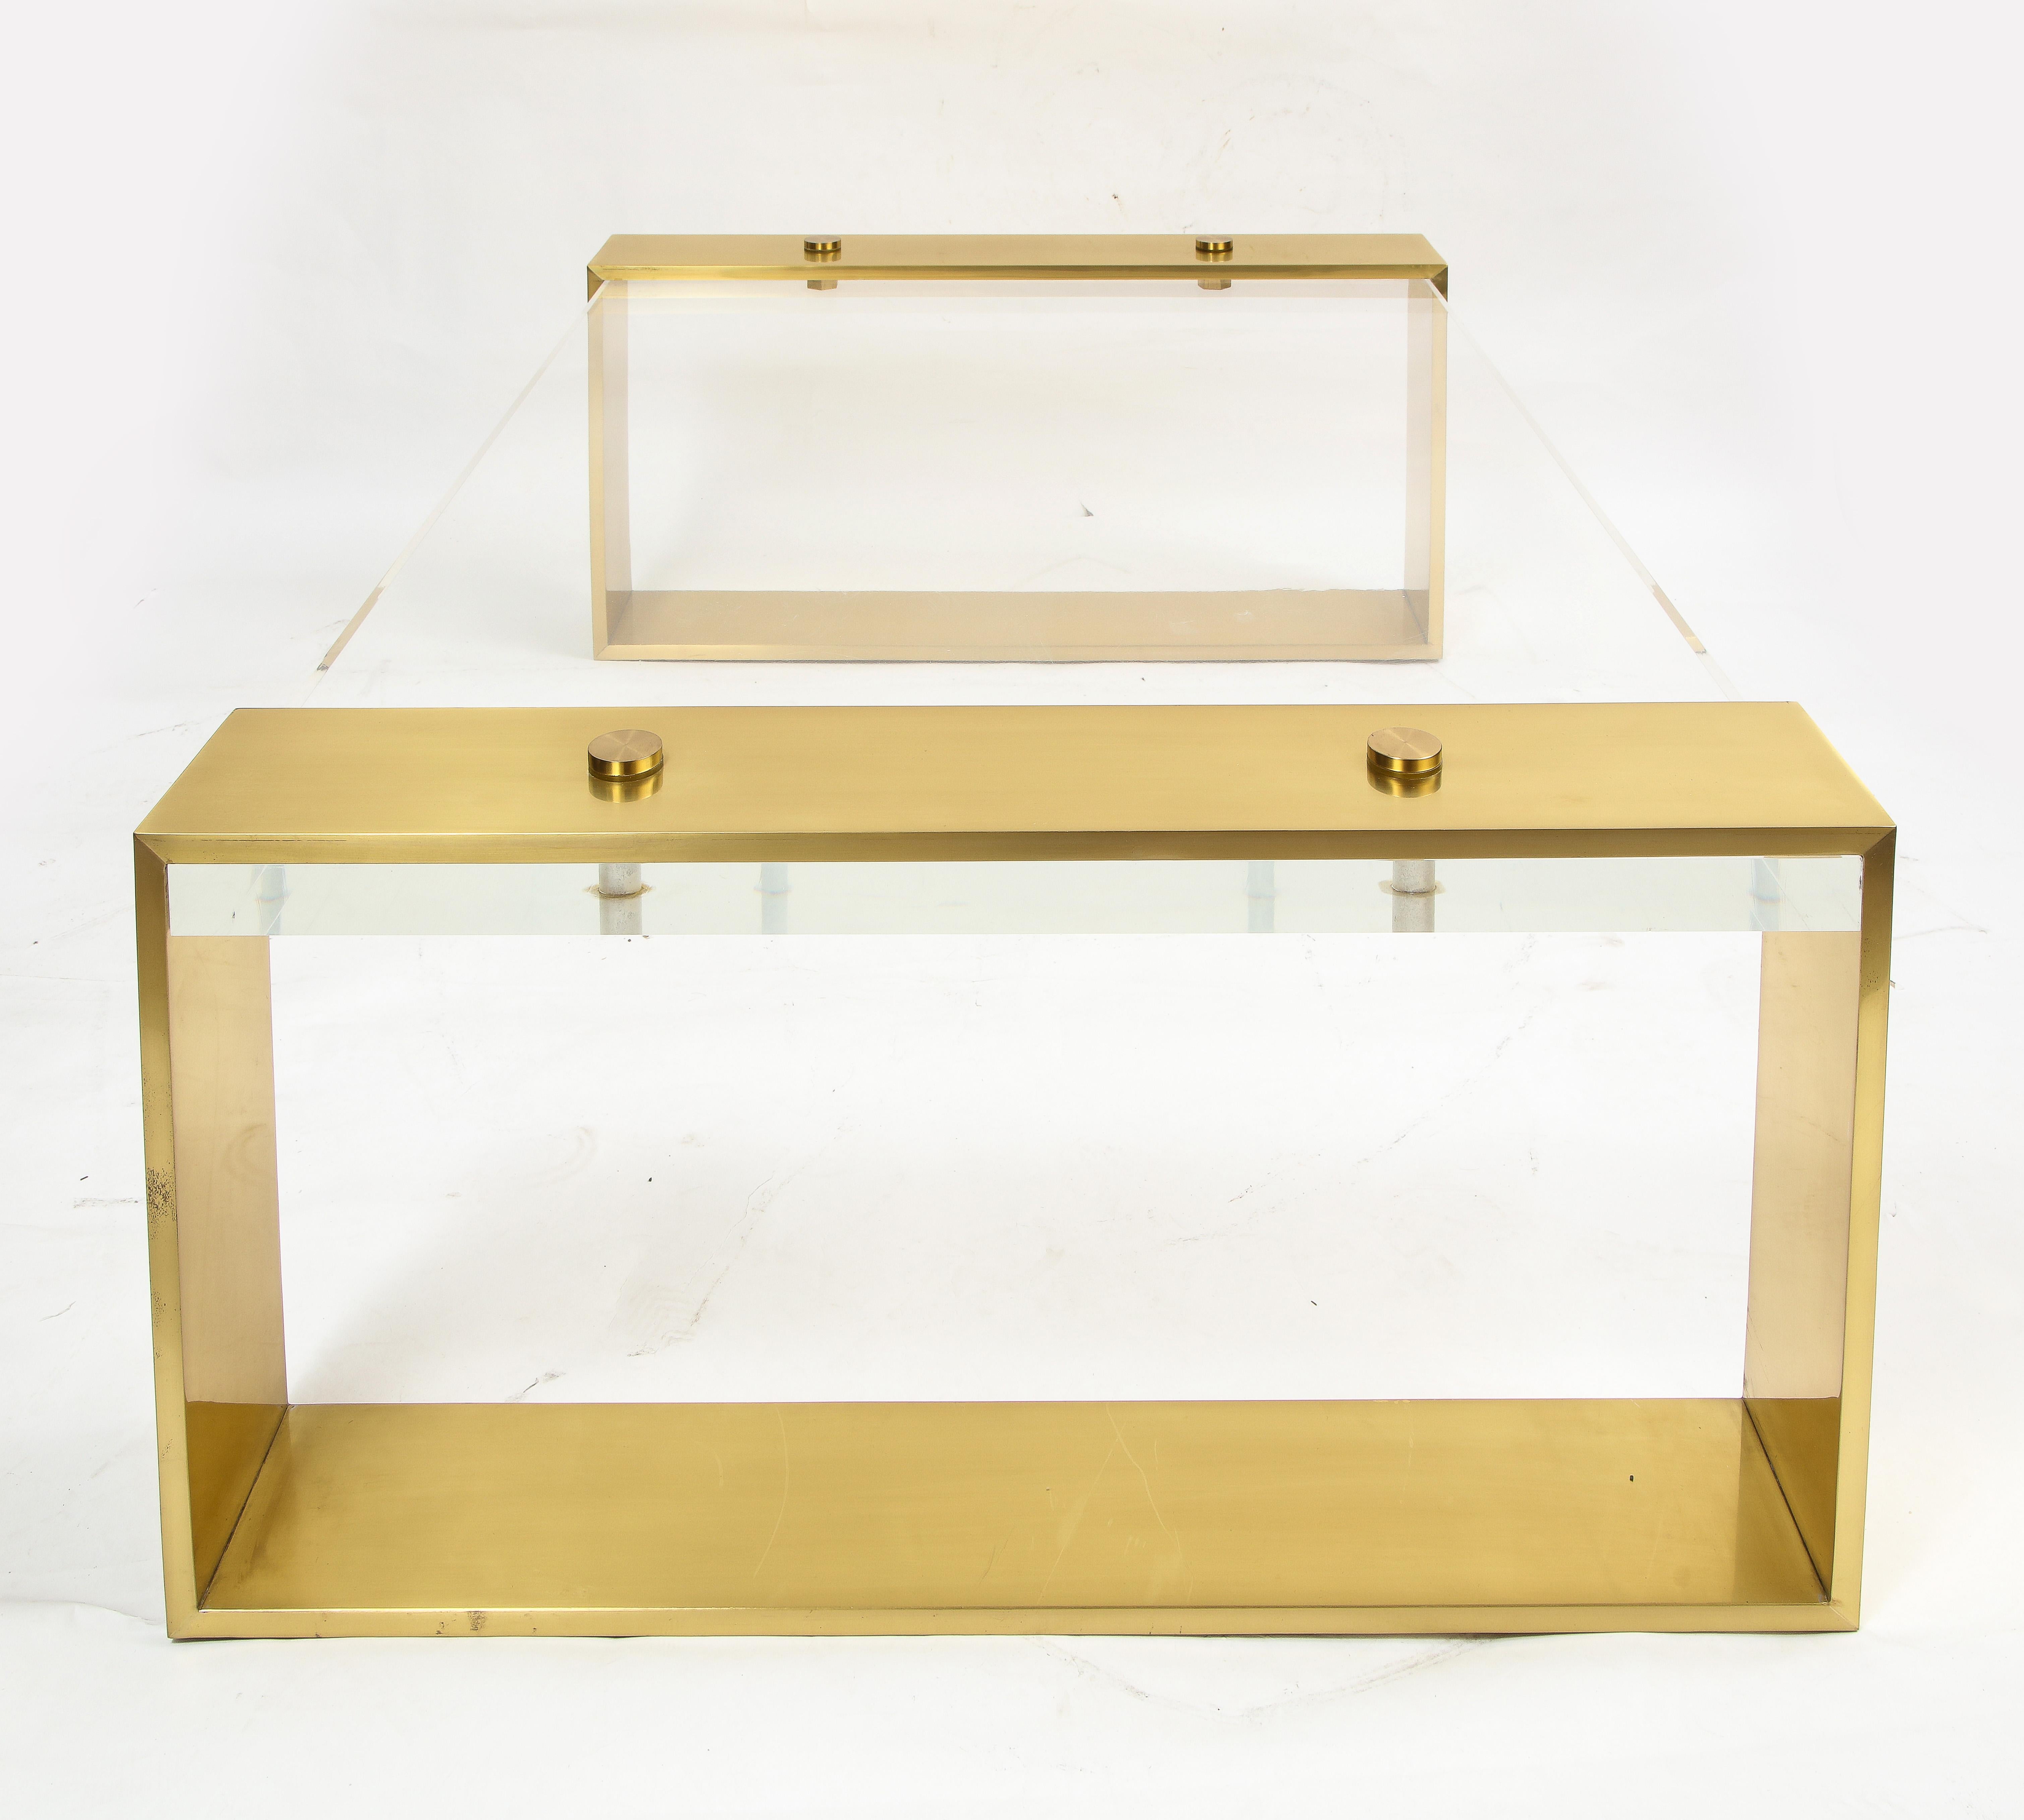 20th Century French Mid-Century Modern Rectangular Bronze Mounted Lucite Top Coffee Table